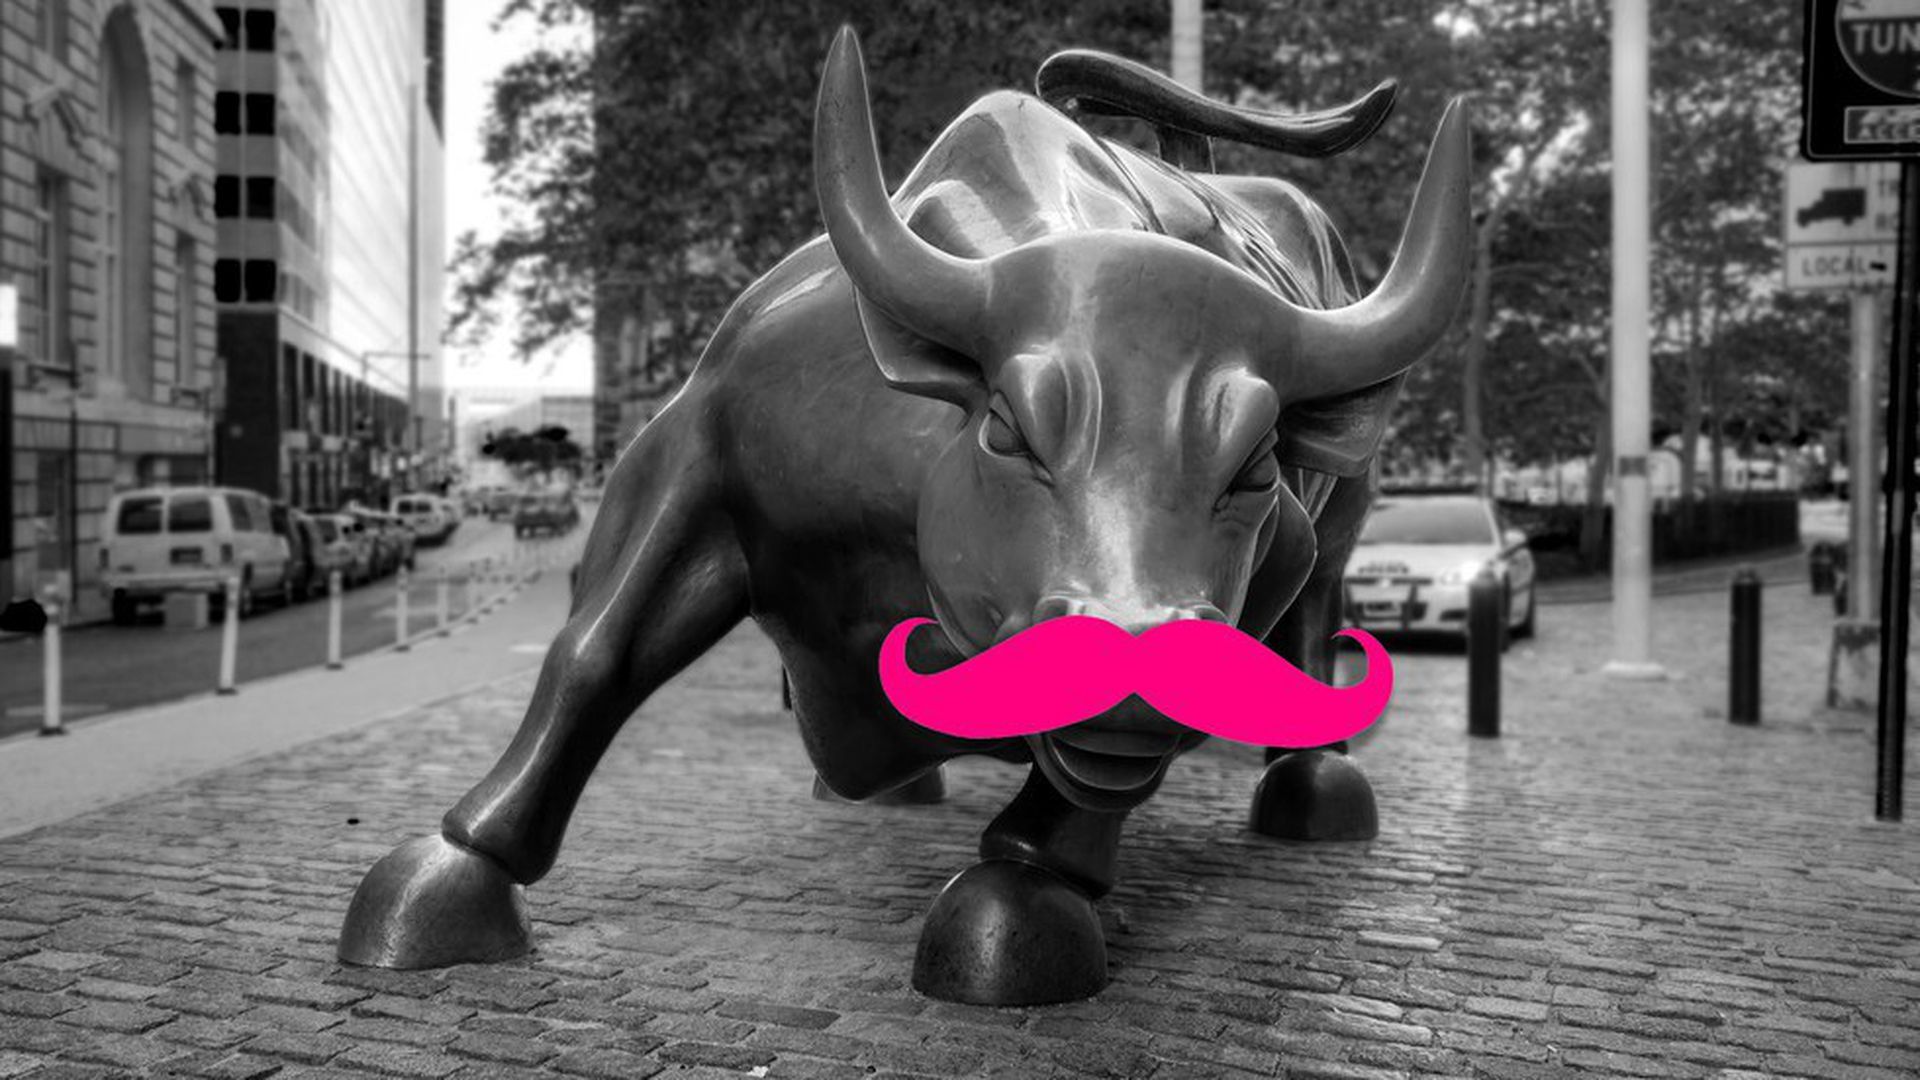 Stock market bull with a hot pink mustache on it